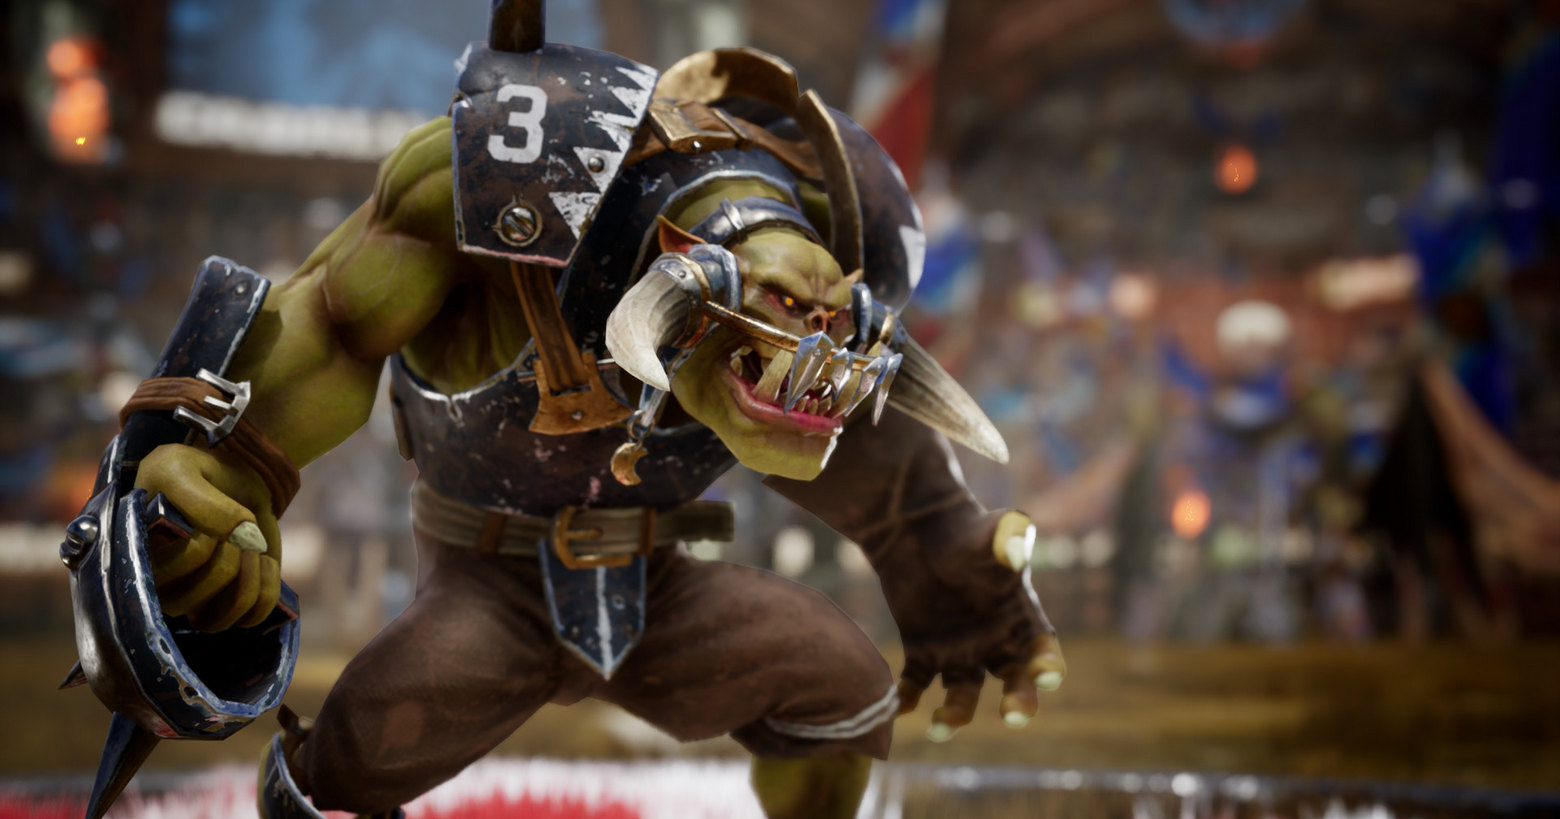 We can see an Orc from Blood Bowl 3 in this screenshot. He is shown in the semi-close-up in the half-profile on the left of the image. The muscular, green-skinned creature wears brown cloth pants and has football-like iron armor. In front of his mouth, the orc wears a kind of protection in the form of a brace. In his right hand, he holds a football brown-leather ball device. With a pouty mouth and sharp teeth, he looks to the right. In the background, the tribune is shown with blue banners in a solid blur. The scene takes place during the day. A release date is confirmed for February, and there will likely be crossplay.